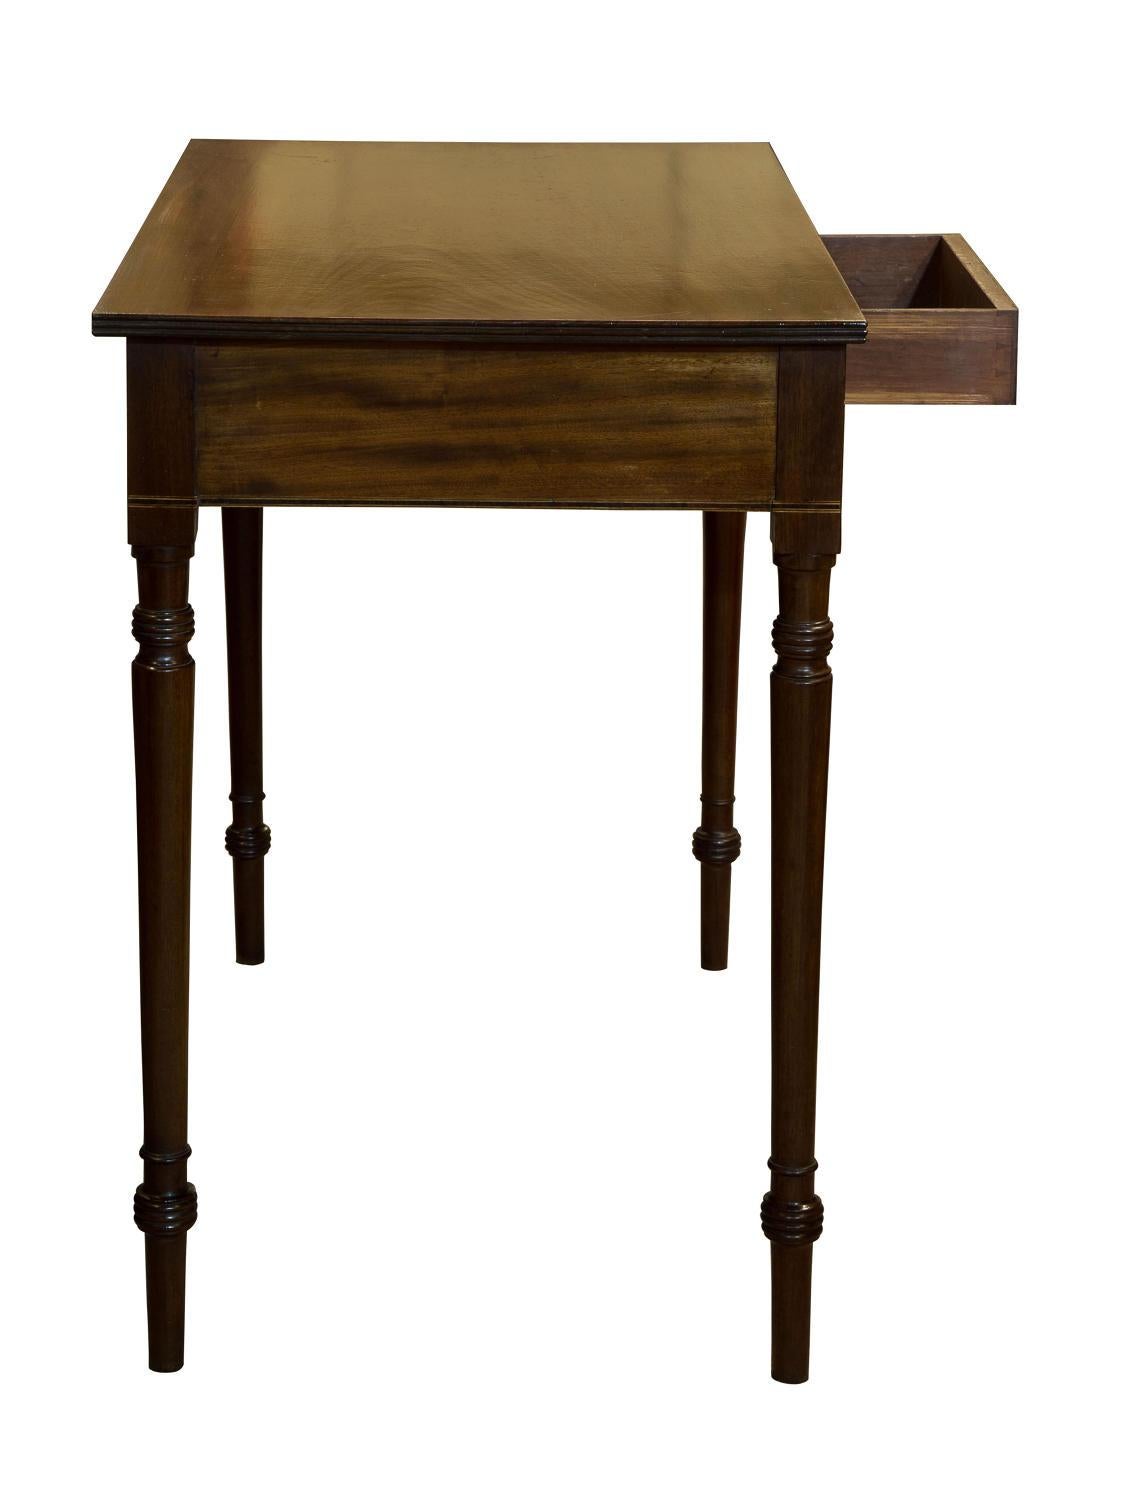 Late 18th century mahogany side table with 1-drawer,

circa 1790.